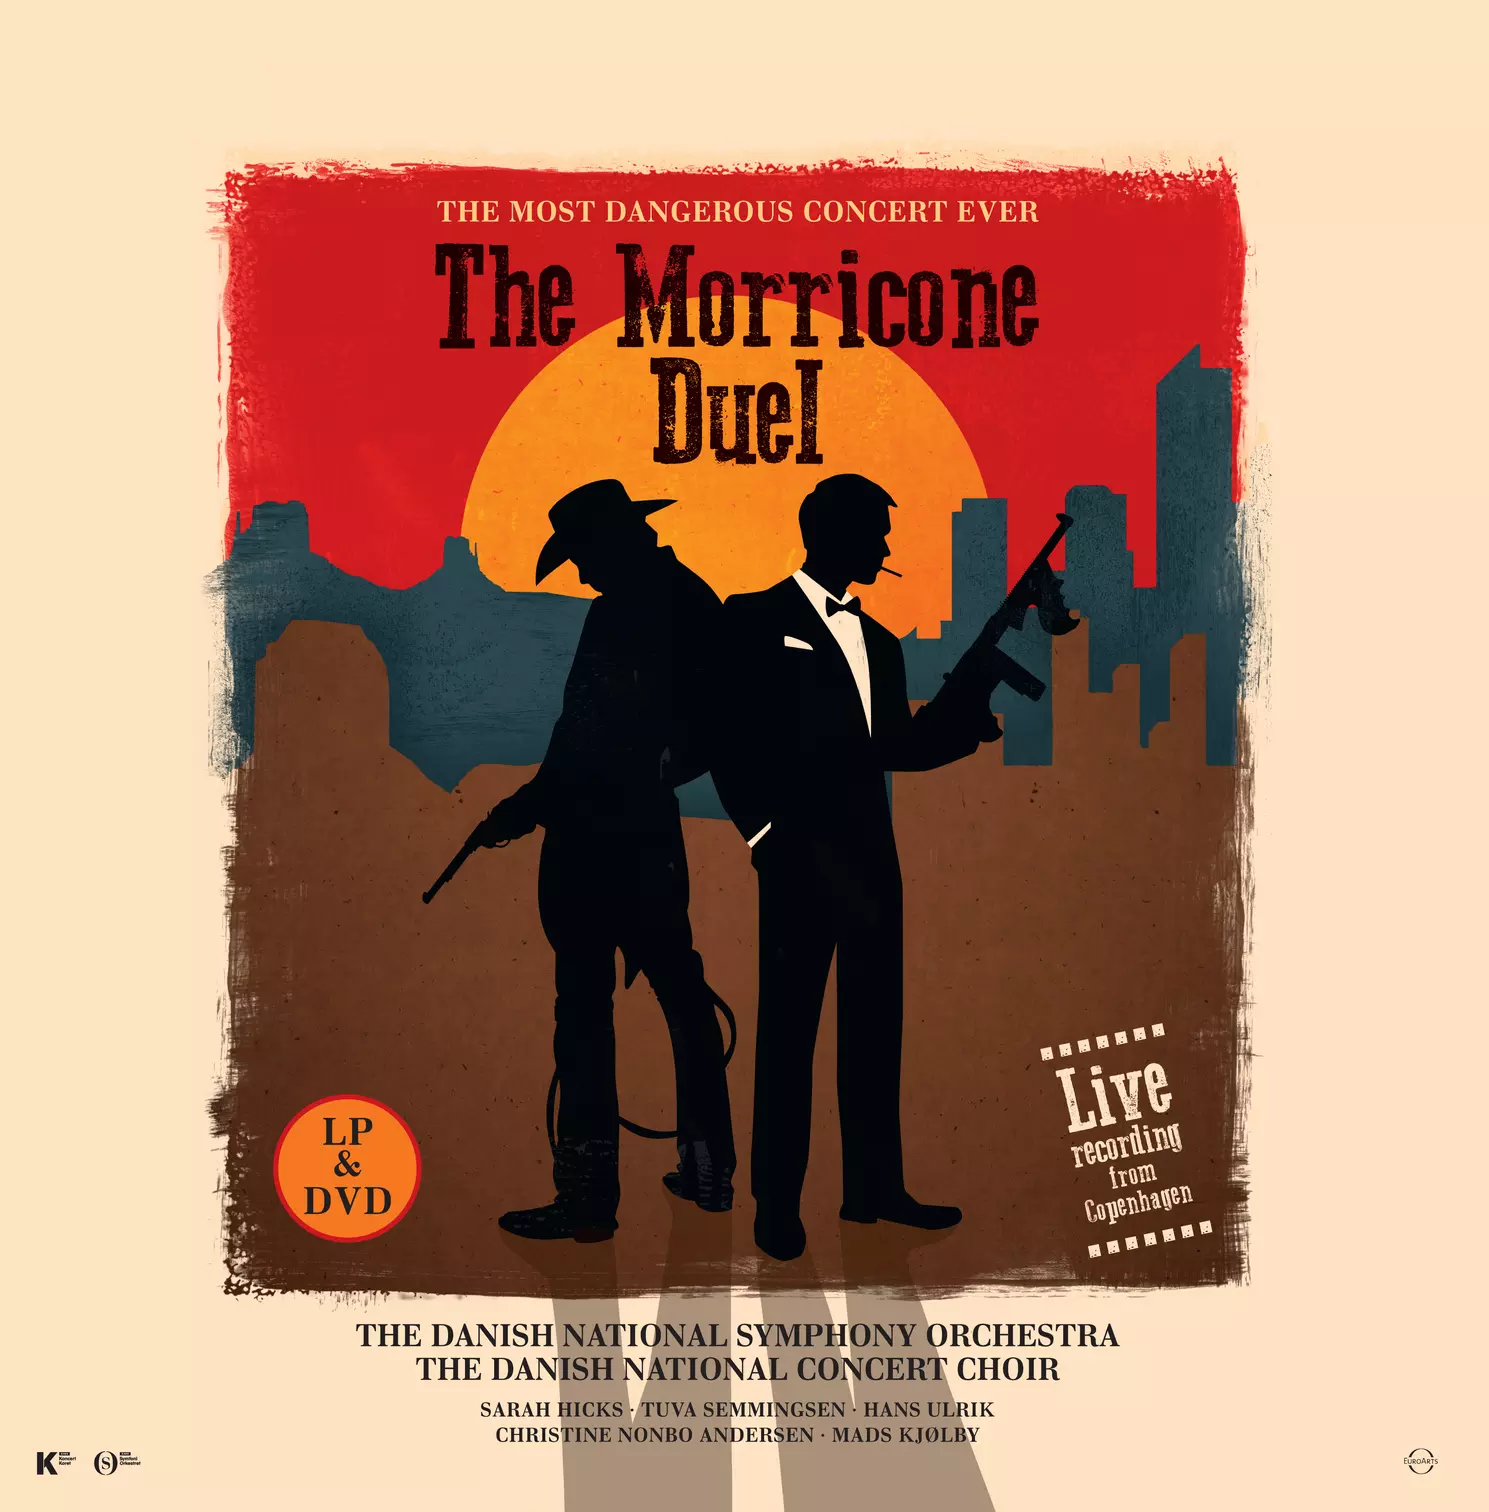 The Morricone Duel - The most dangerous concert ever